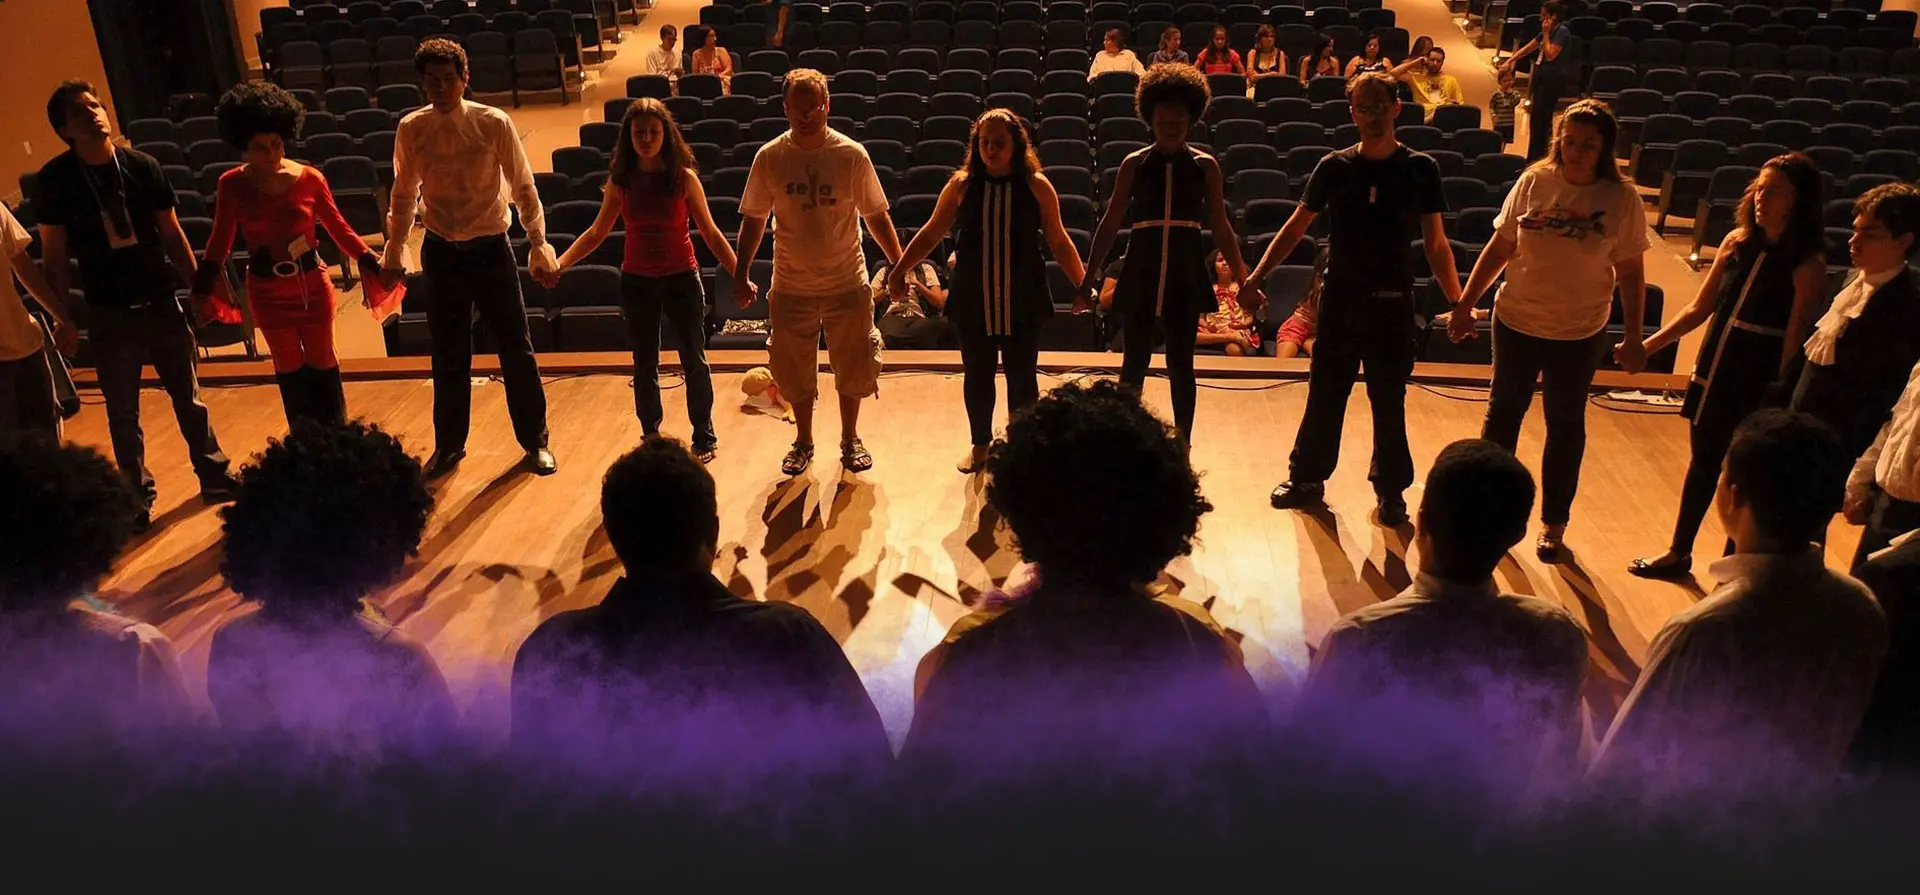 A group of people standing on the floor in front of purple lights.